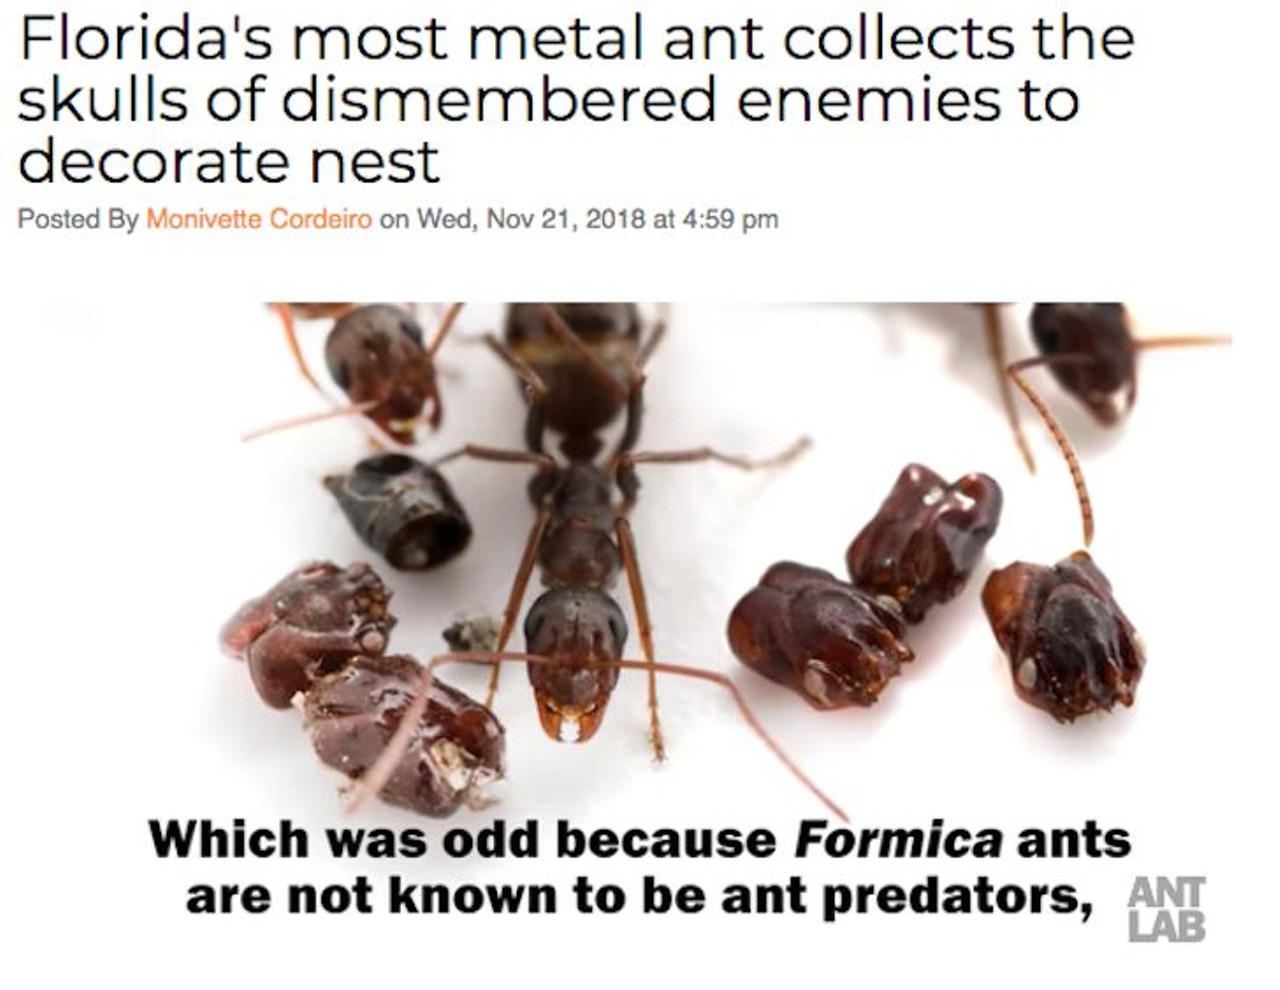 The state's most metal ant tricks a powerful species known as trap-jaw ants by chemically mimicking them and then spraying these enemy ants with immobilizing formic acid. Read more here.